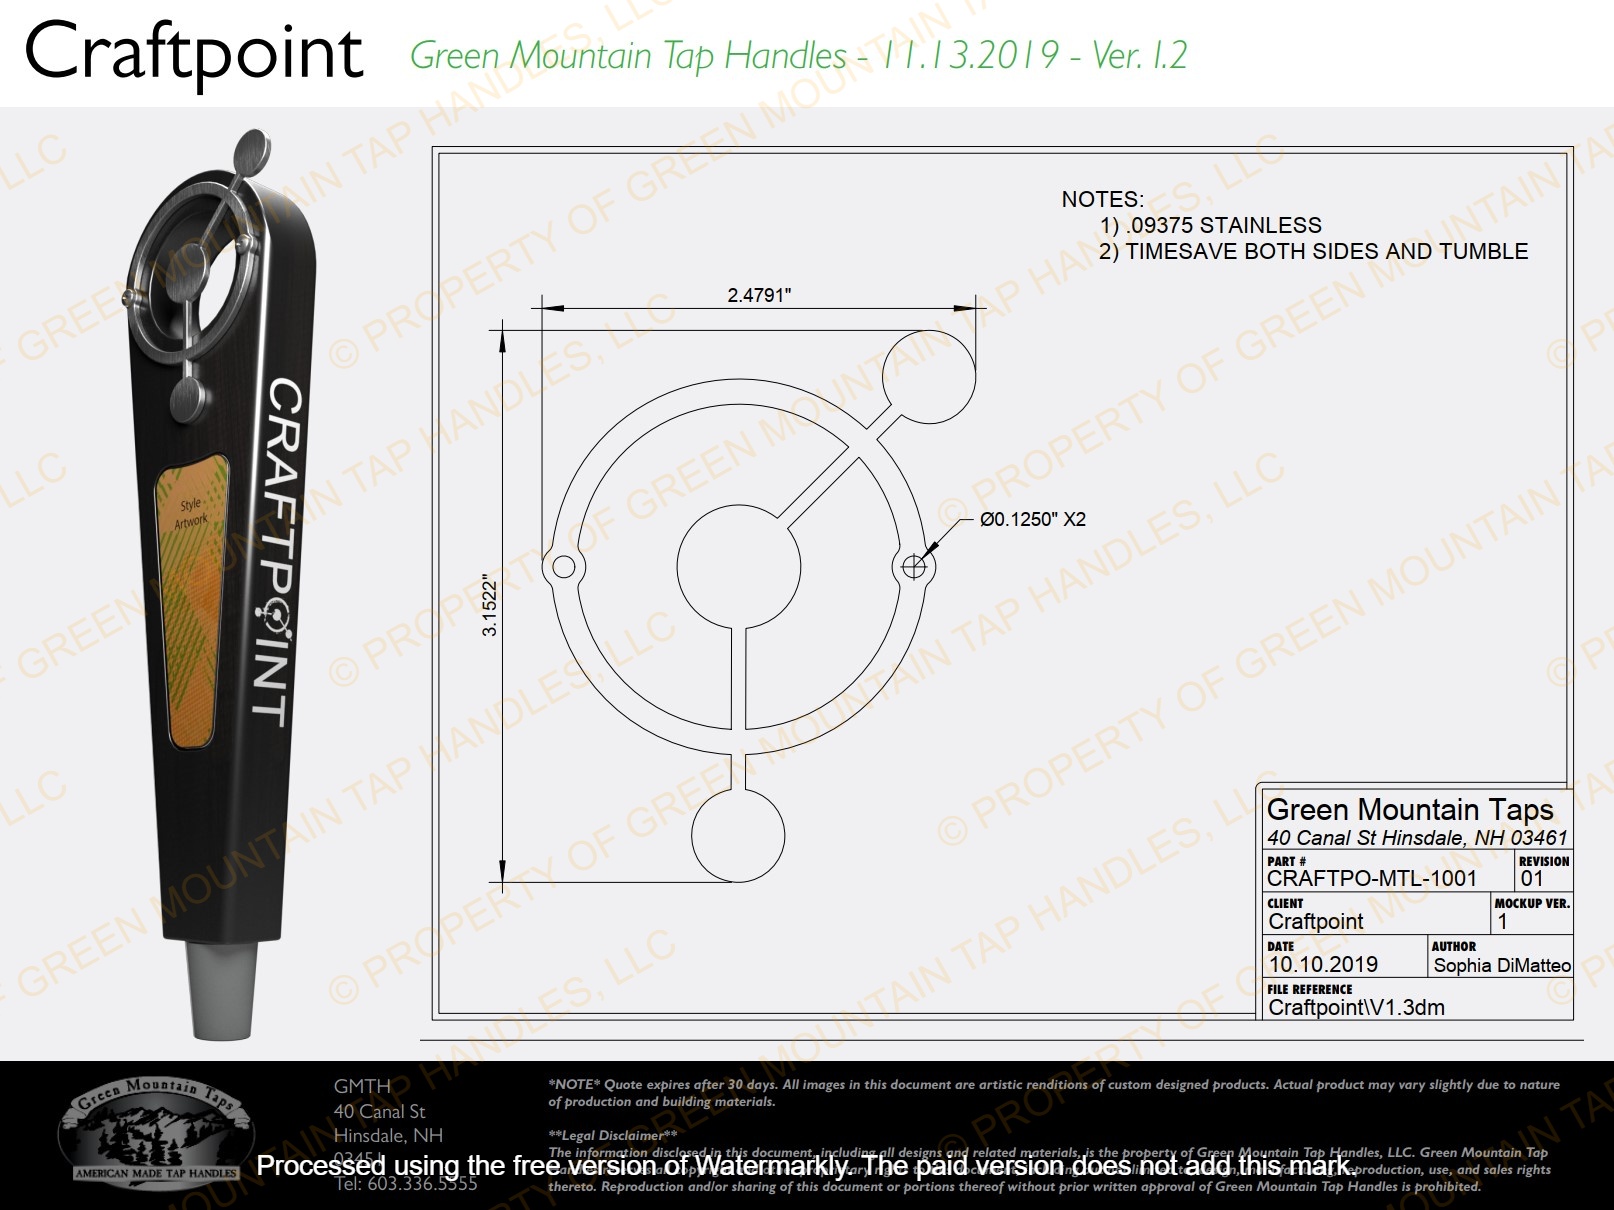 An example of a product with a technical part drawing.
           * * * Legal Disclaimer: The information disclosed in this document, including all designs and related materials, is the property of Green Mountain Tap Handles, LLC.
           Green Mountain Tap Handles reserves all copyright and other proprietary rights to this document, including but not limited to, design, manufacturing, reproduction, use, and sales rights thereto.
           Reproduction and/or sharing of this document or portions thereof without prior written approval of Green Mountain Tap Handles is prohibited.